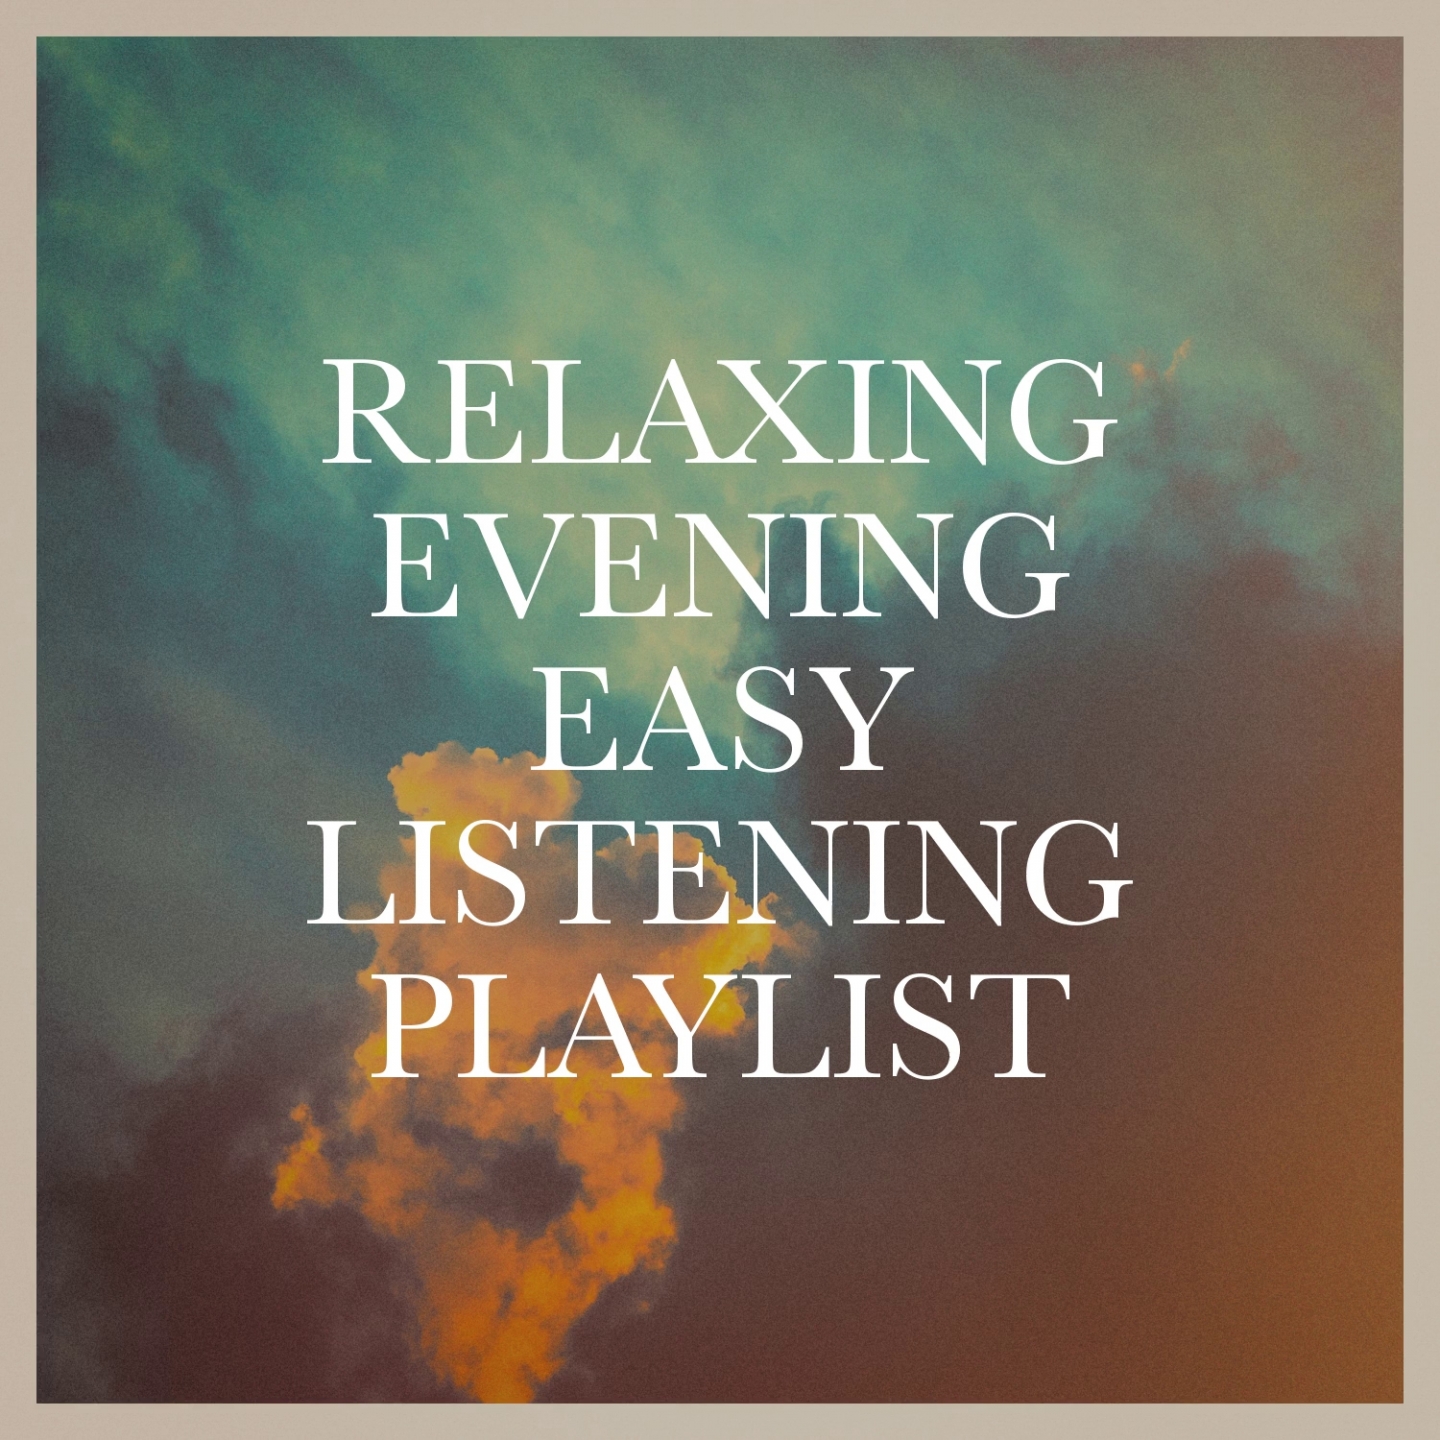 Relaxing Evening Easy Listening Playlist